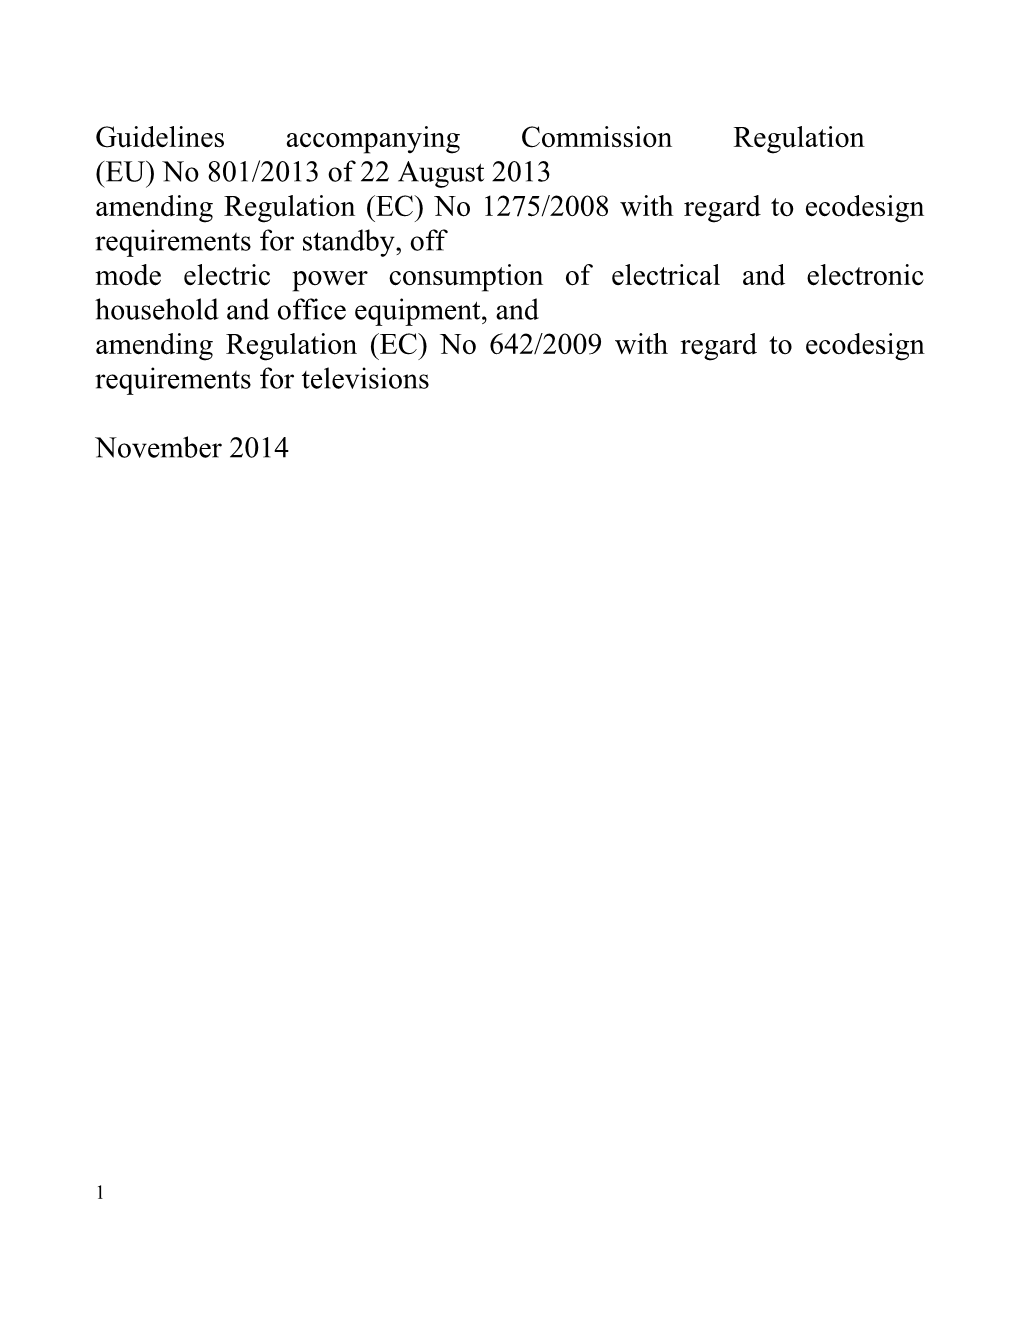 Amending Regulation (EC) No 1275/2008 with Regard to Ecodesign Requirements for Standby, Off